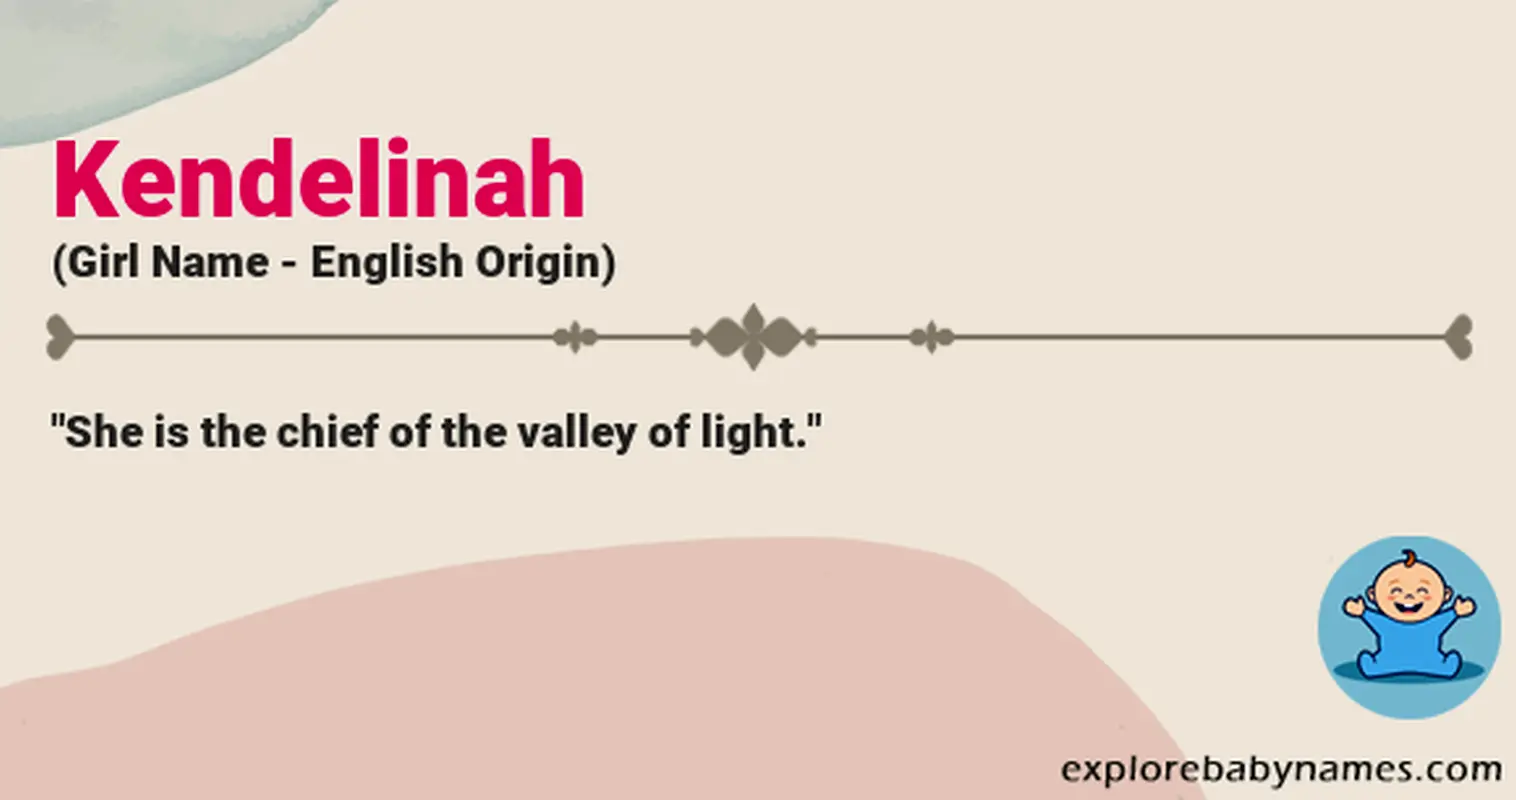 Meaning of Kendelinah